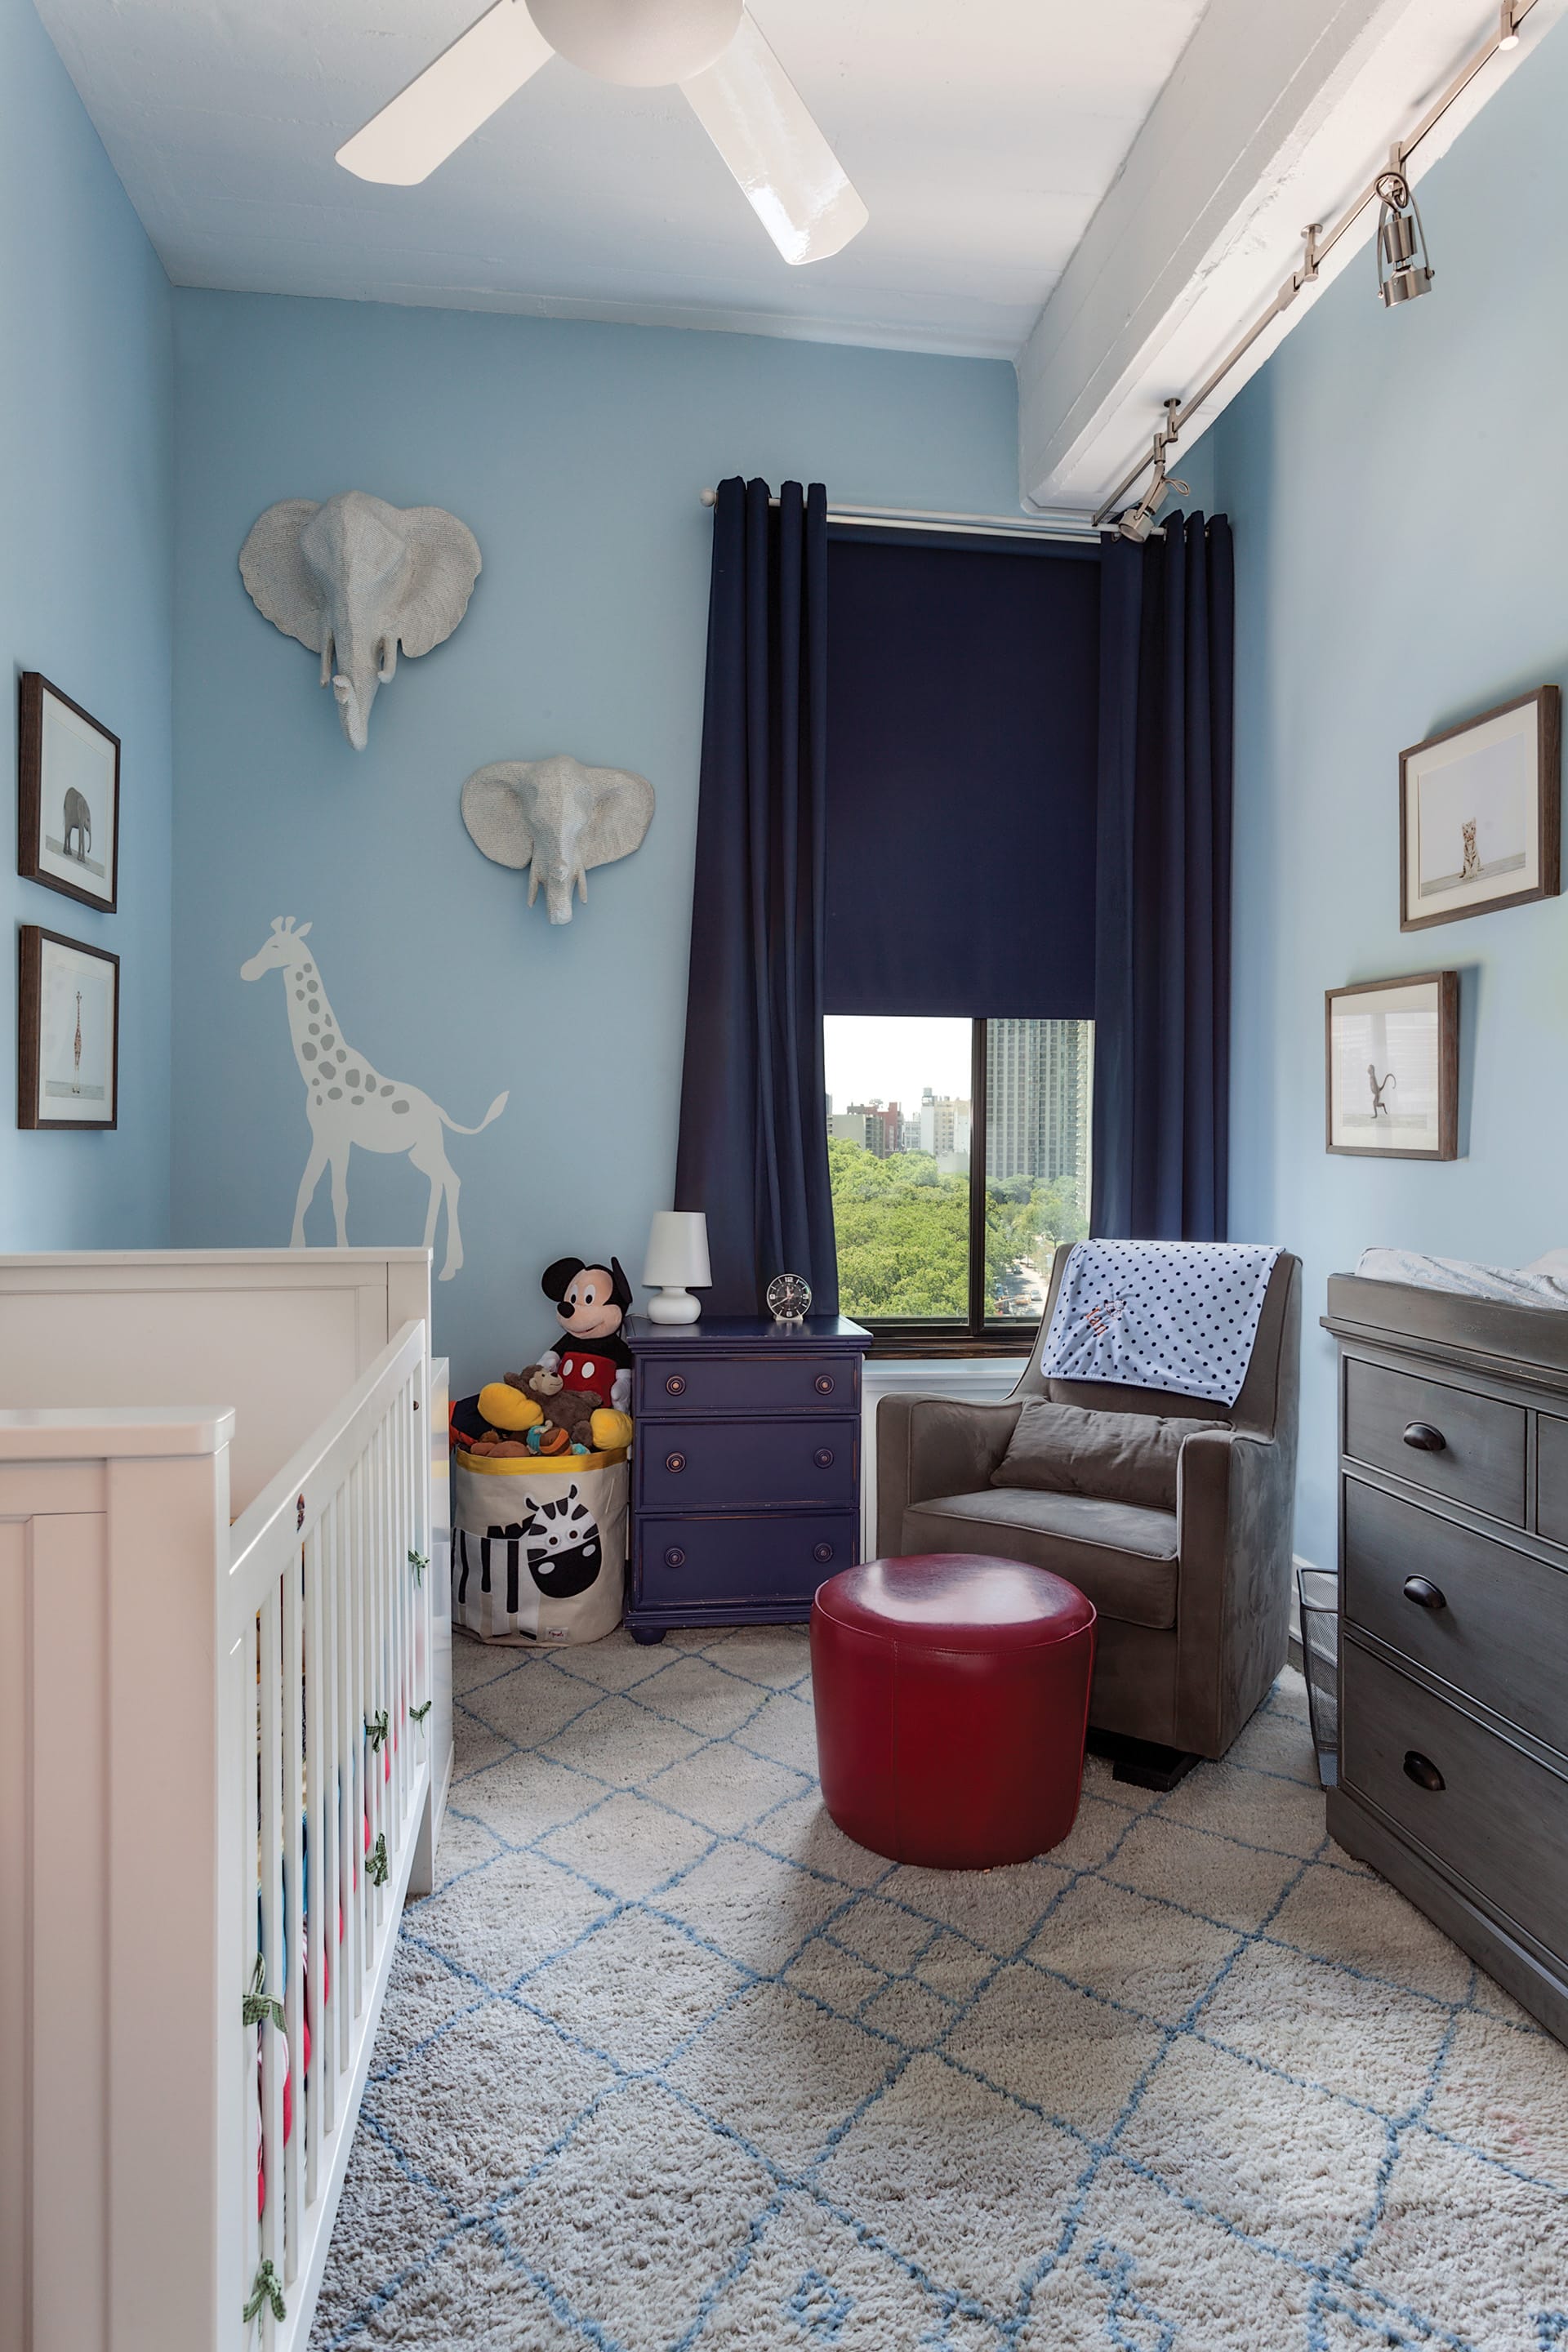 Nursery with a white crib, grey wood dresser, light blue walls, white animals on the wall, and navy blue curtains.